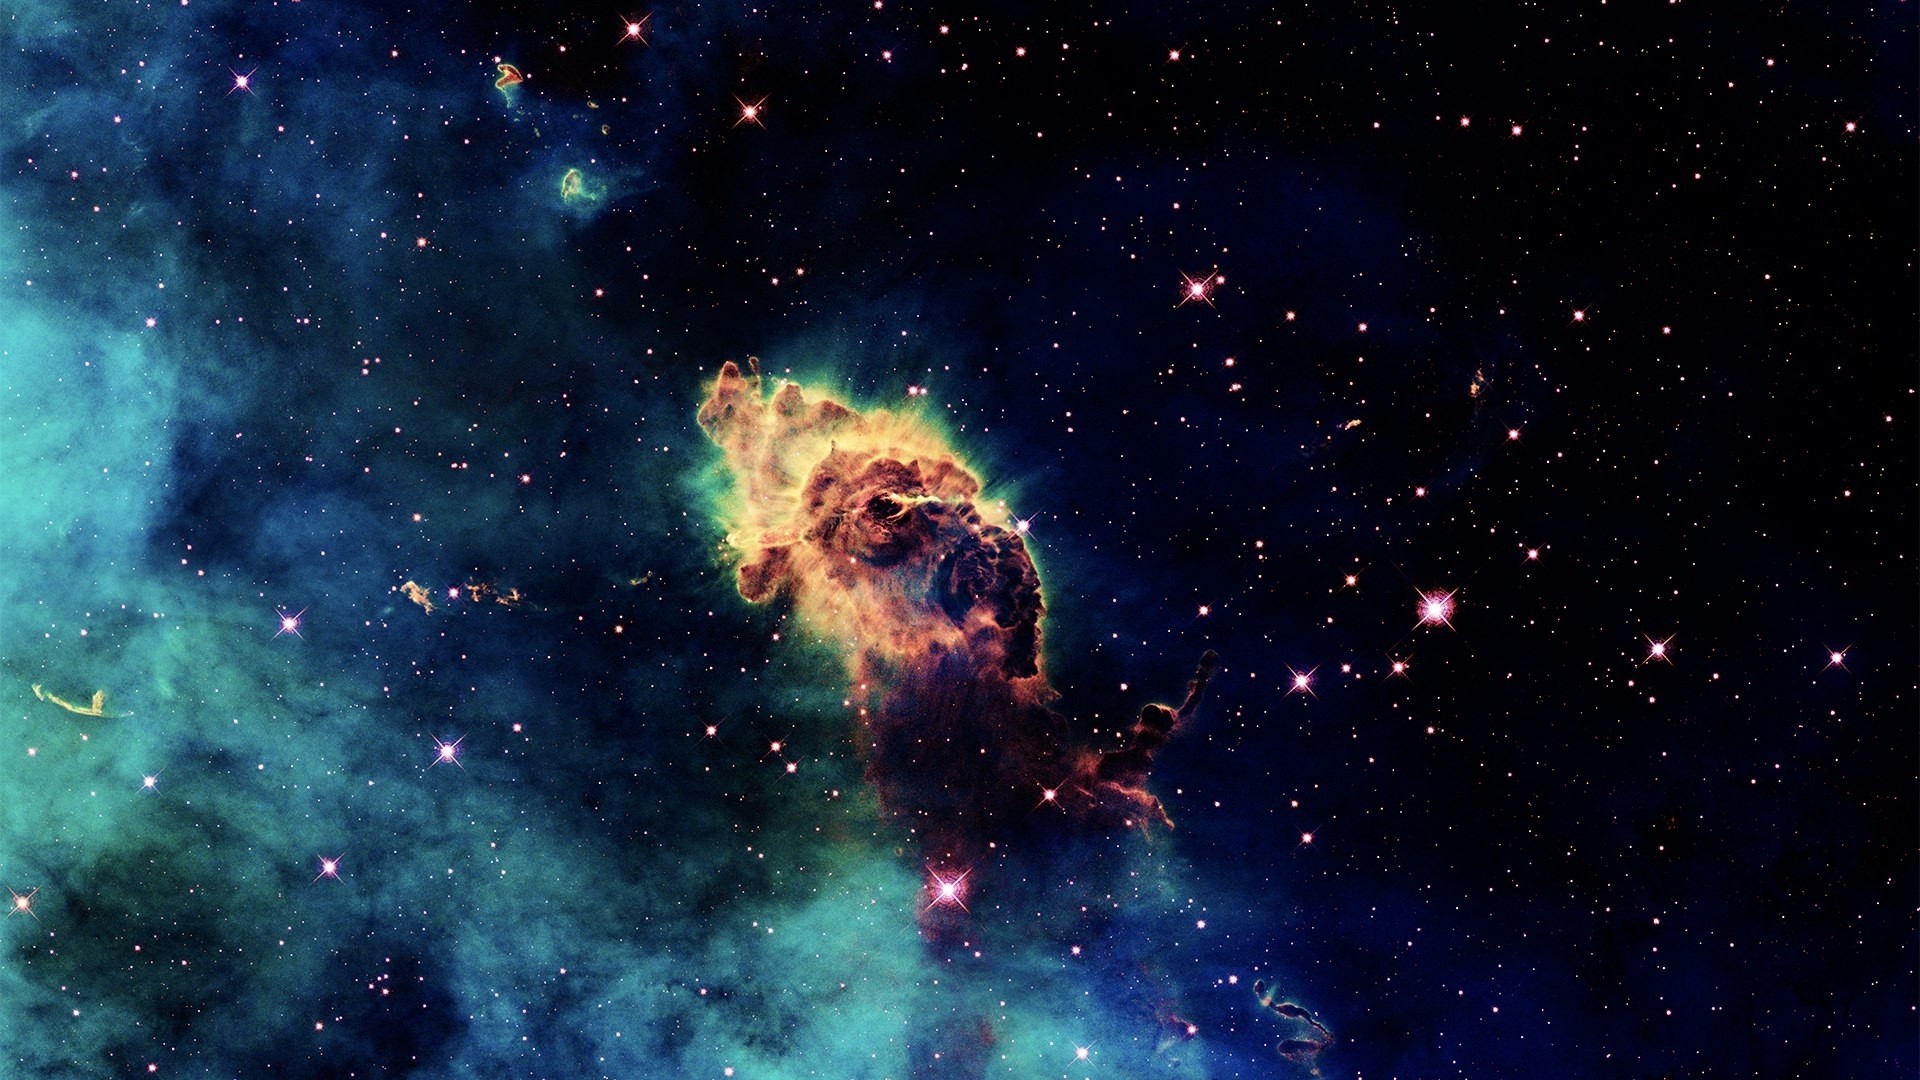 1920x1080 Title : 50 hd space wallpapers/backgrounds for free download. Dimension :  1920 x 1080. File Type : JPG/JPEG